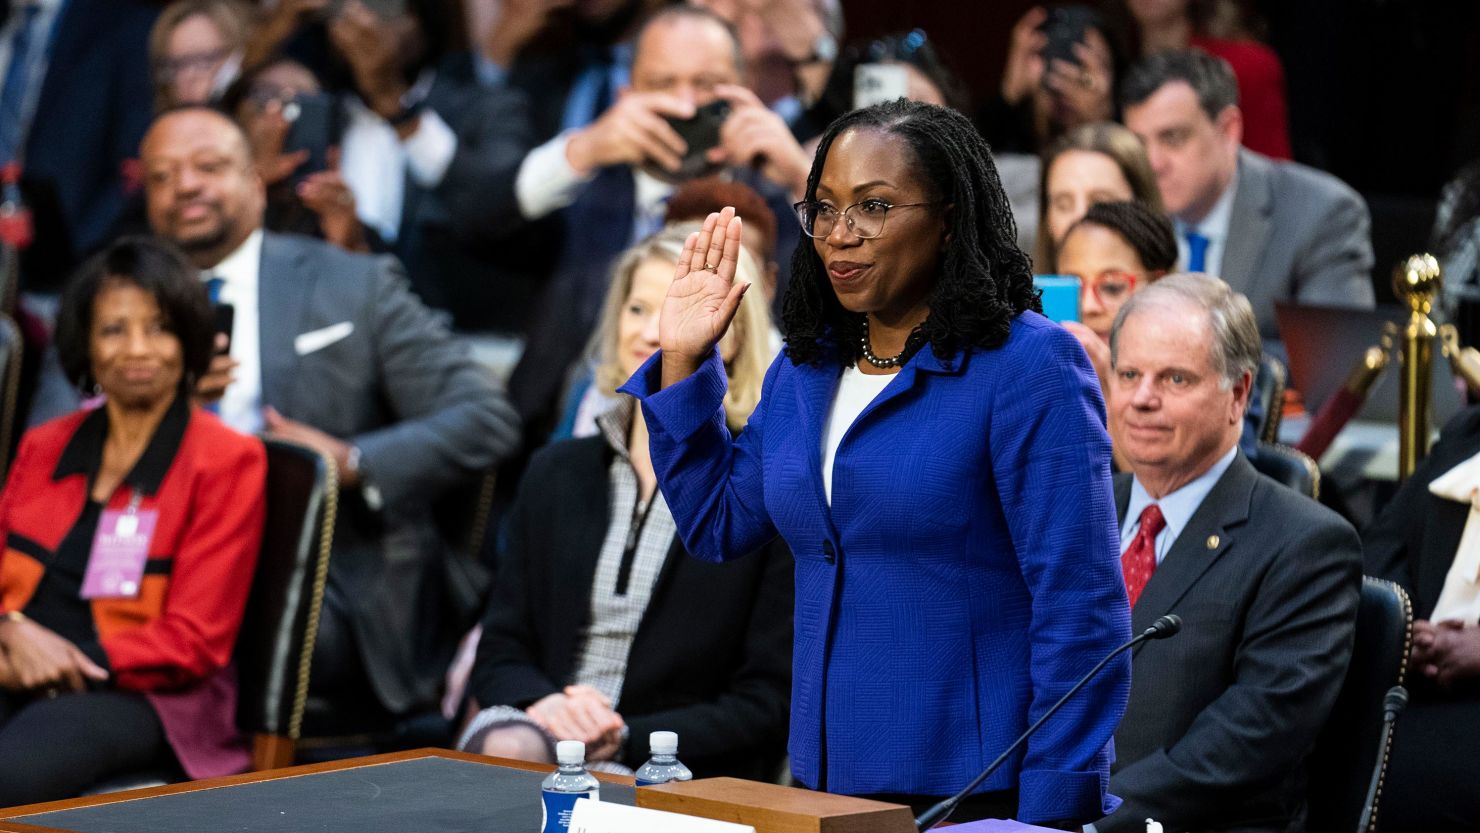 Judge Ketanji Brown Jackson is sworn in to testify before the Senate Judiciary Committee during a confirmation hearing to join the US Supreme Court, on Capitol Hill in Washington, on Monday, March 21, 2022. 